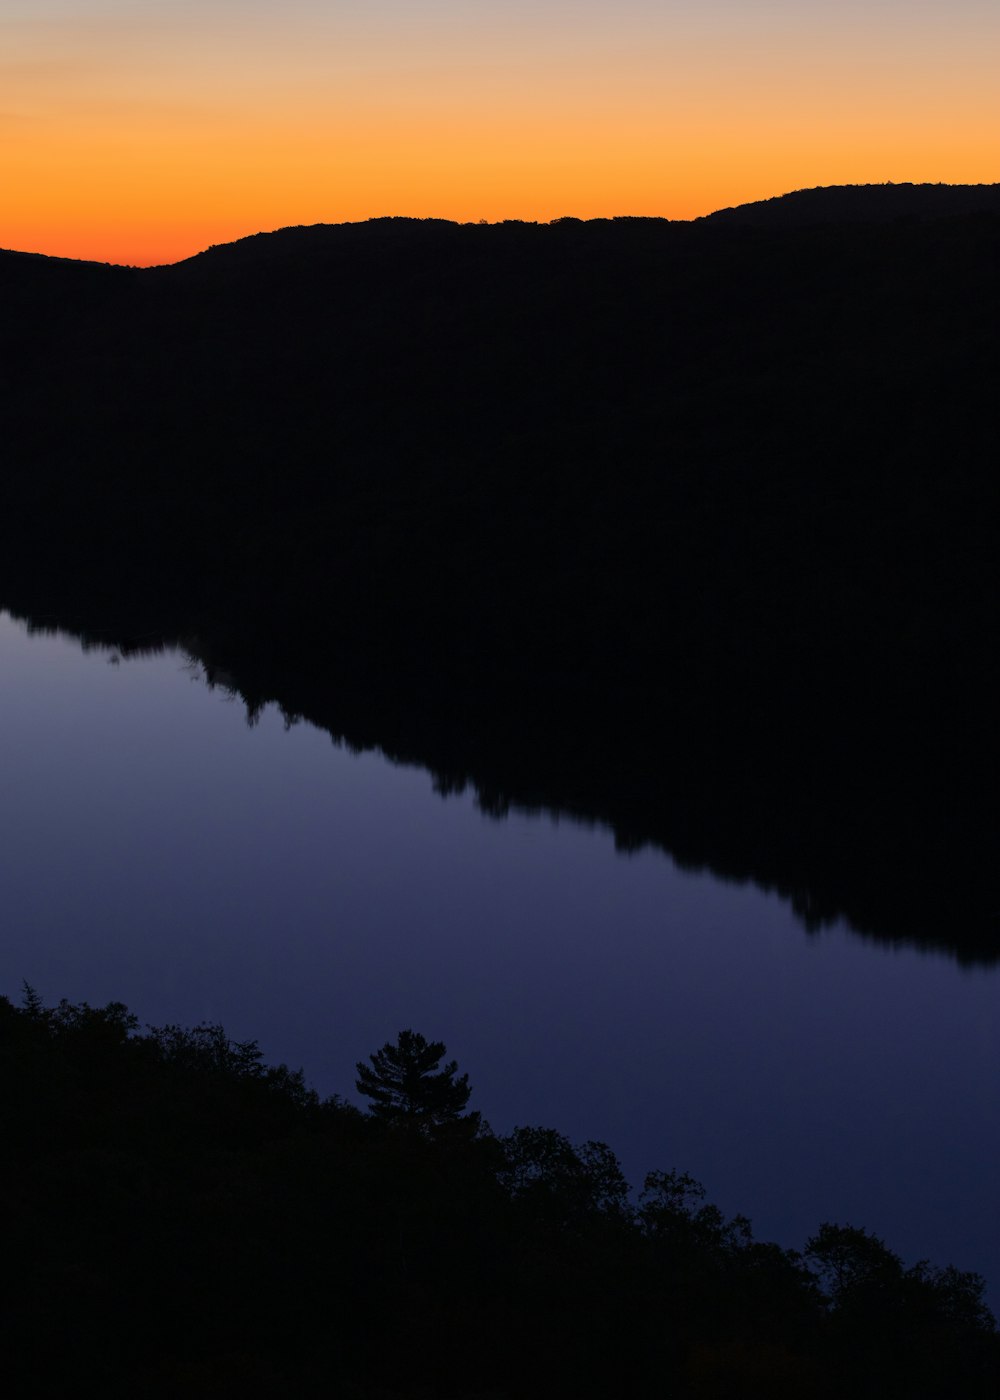 the sun is setting over a lake in the mountains